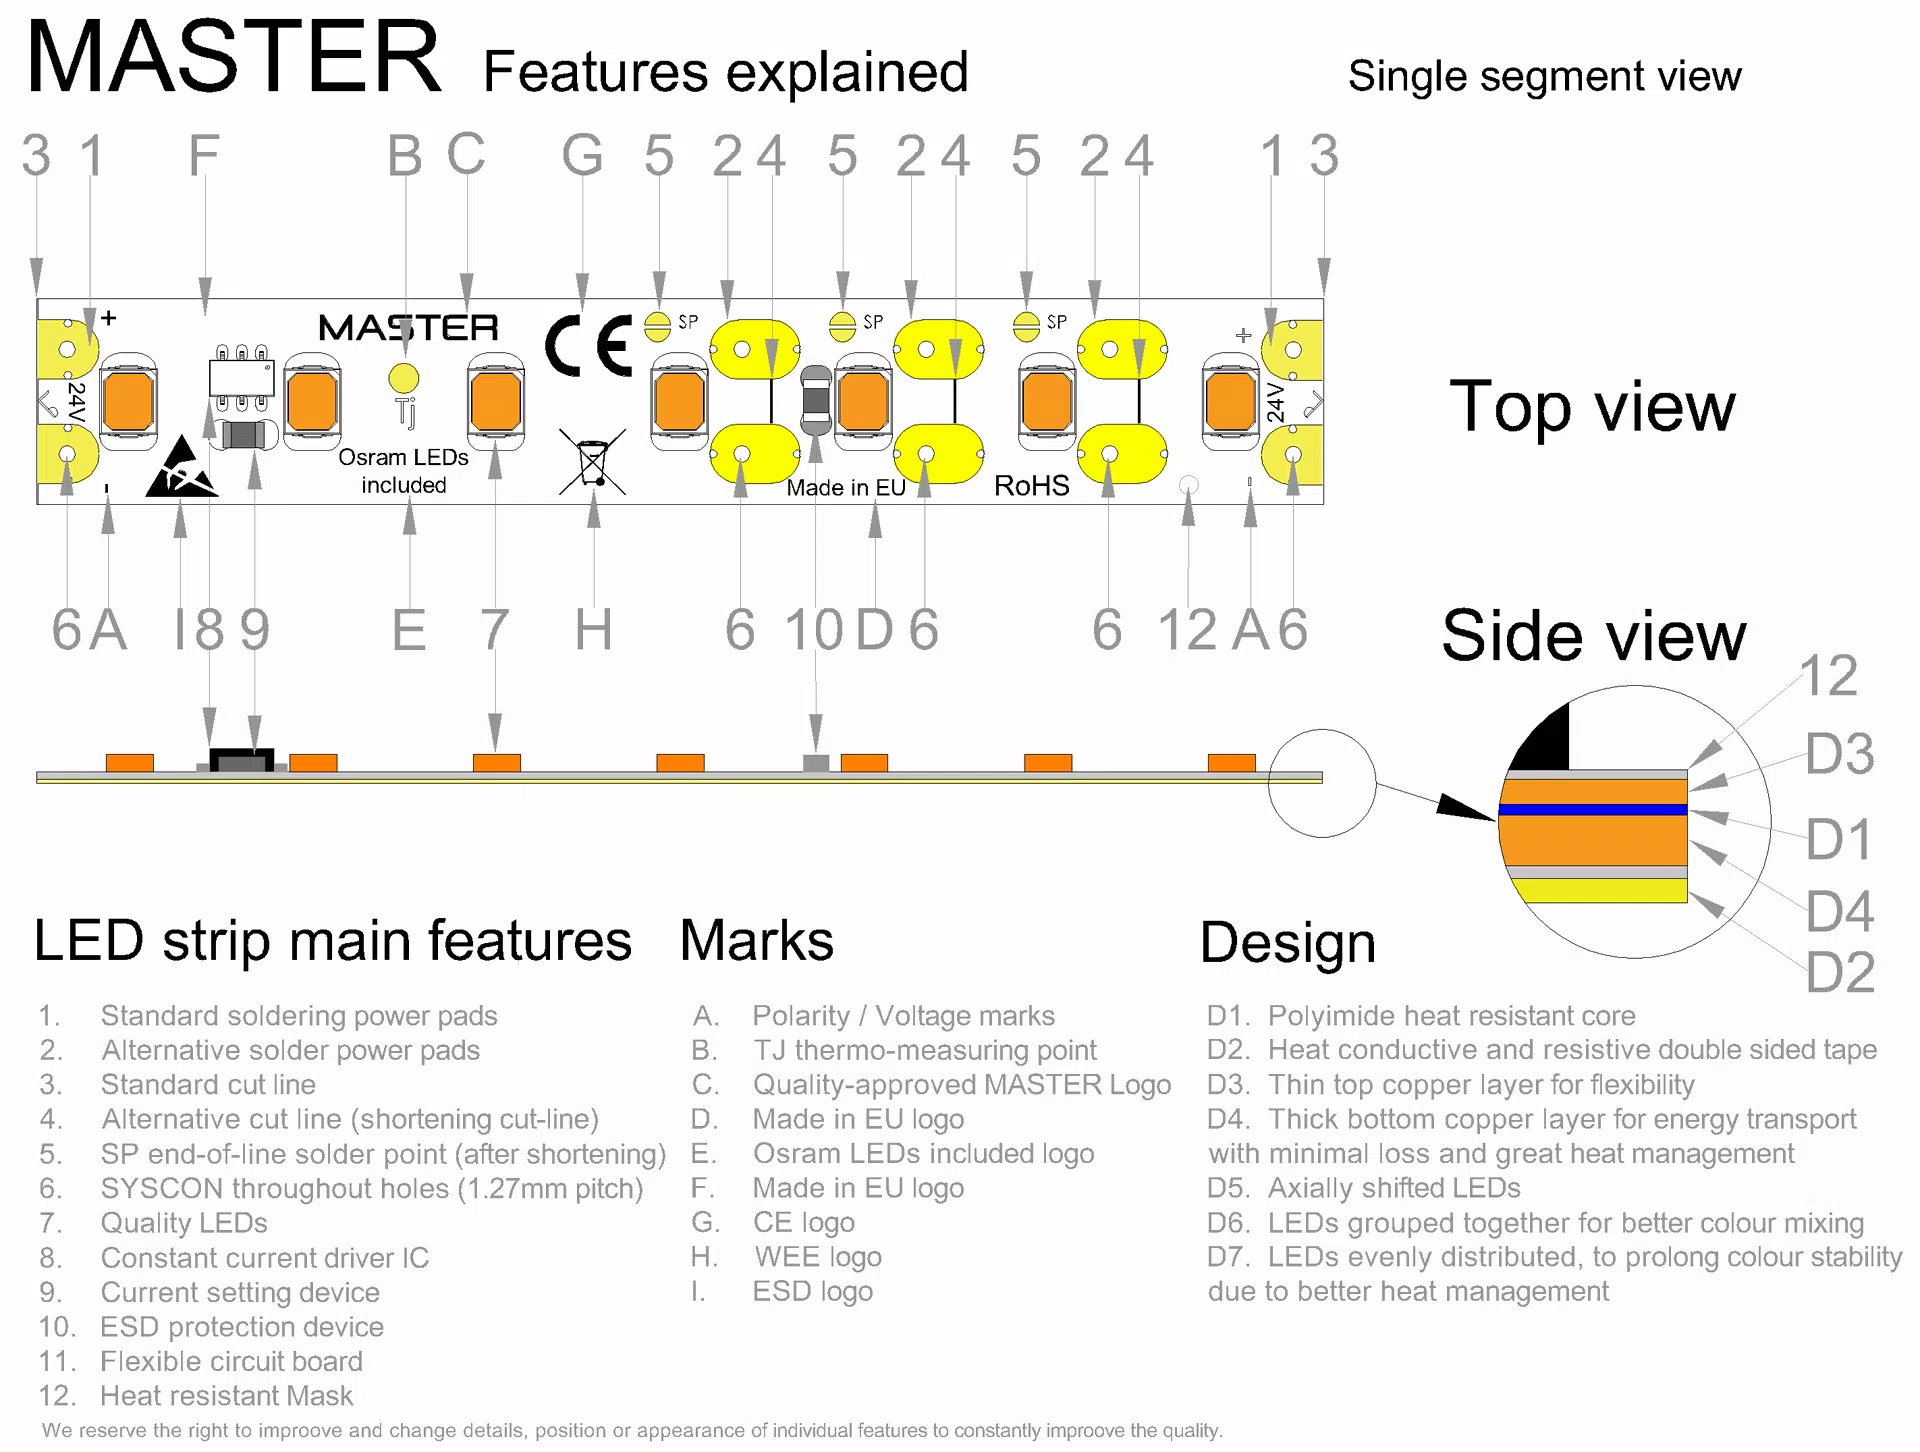 MASTER HD-MEDIUM LED strip segment drawing with all features explained